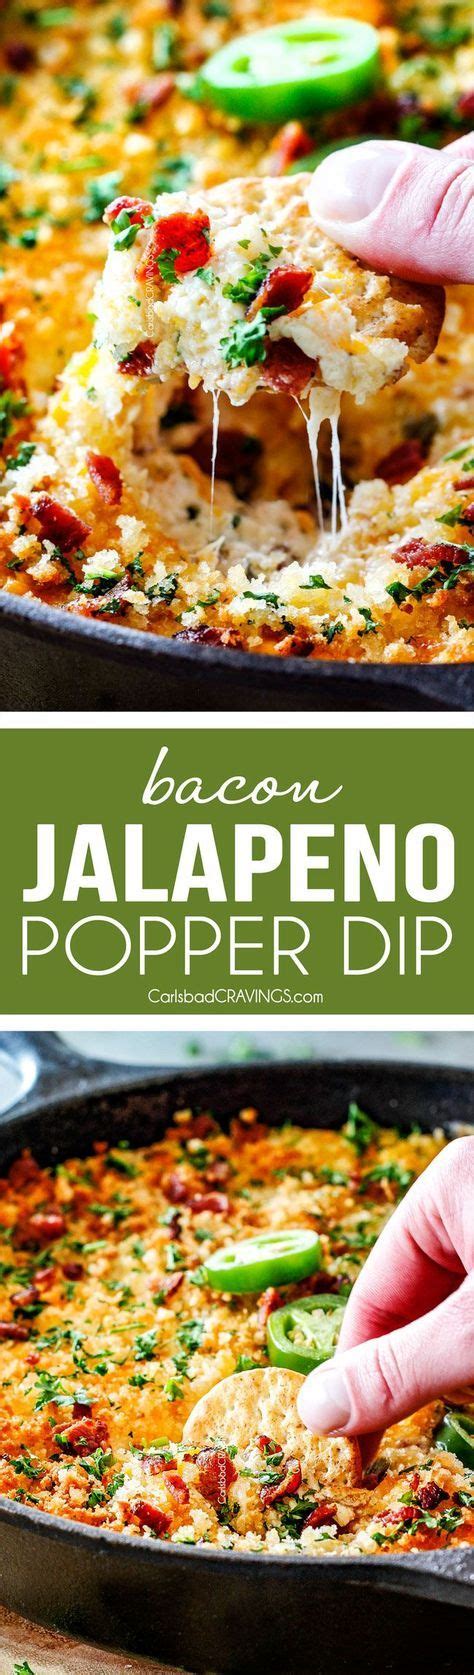 This Quick And Easy Jalapeno Popper Dip With Bacon Tastes Like Your